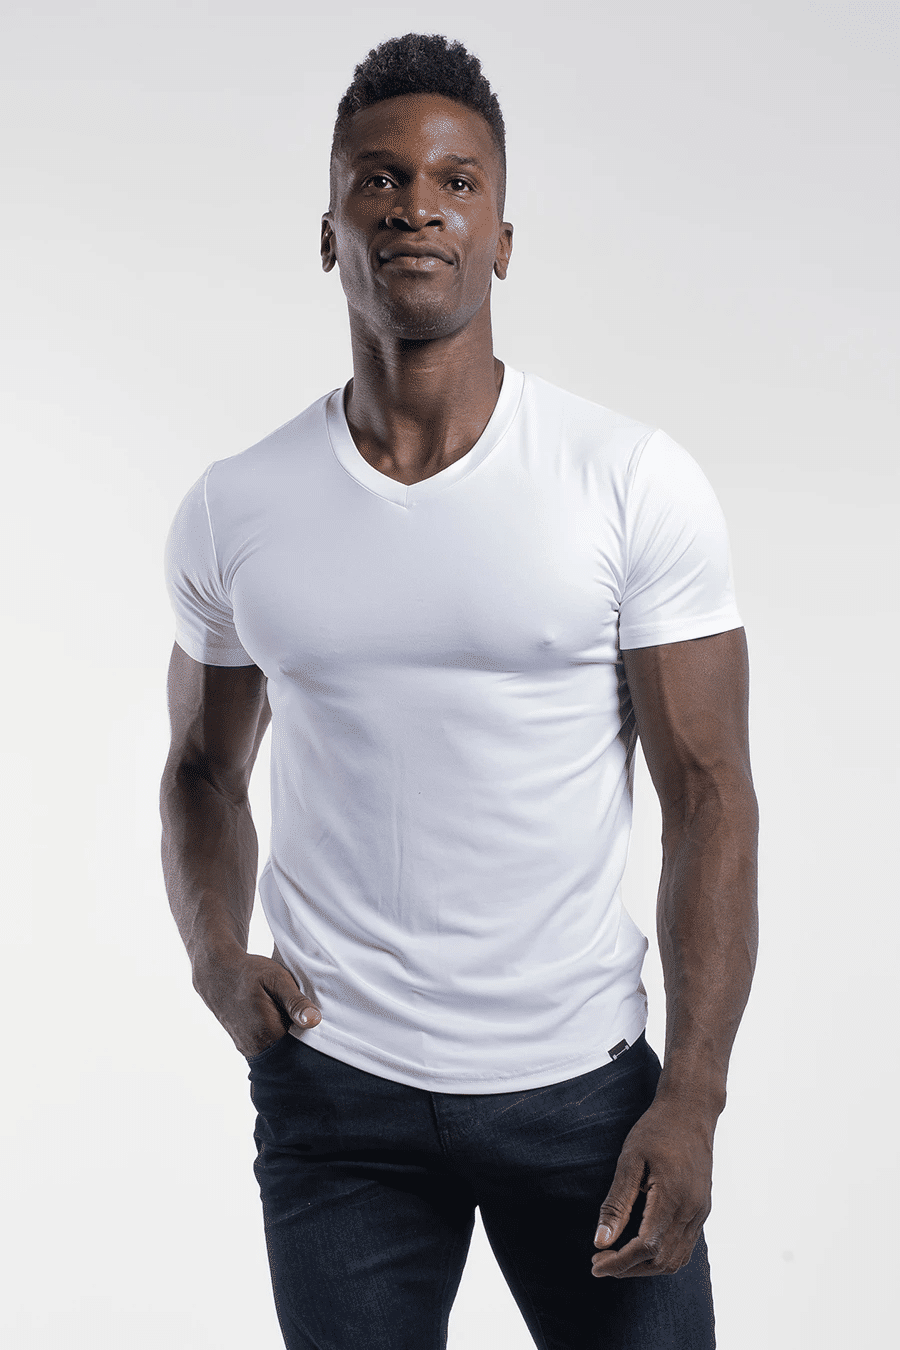 Short Sleeve Compression Top – Well Fit Active